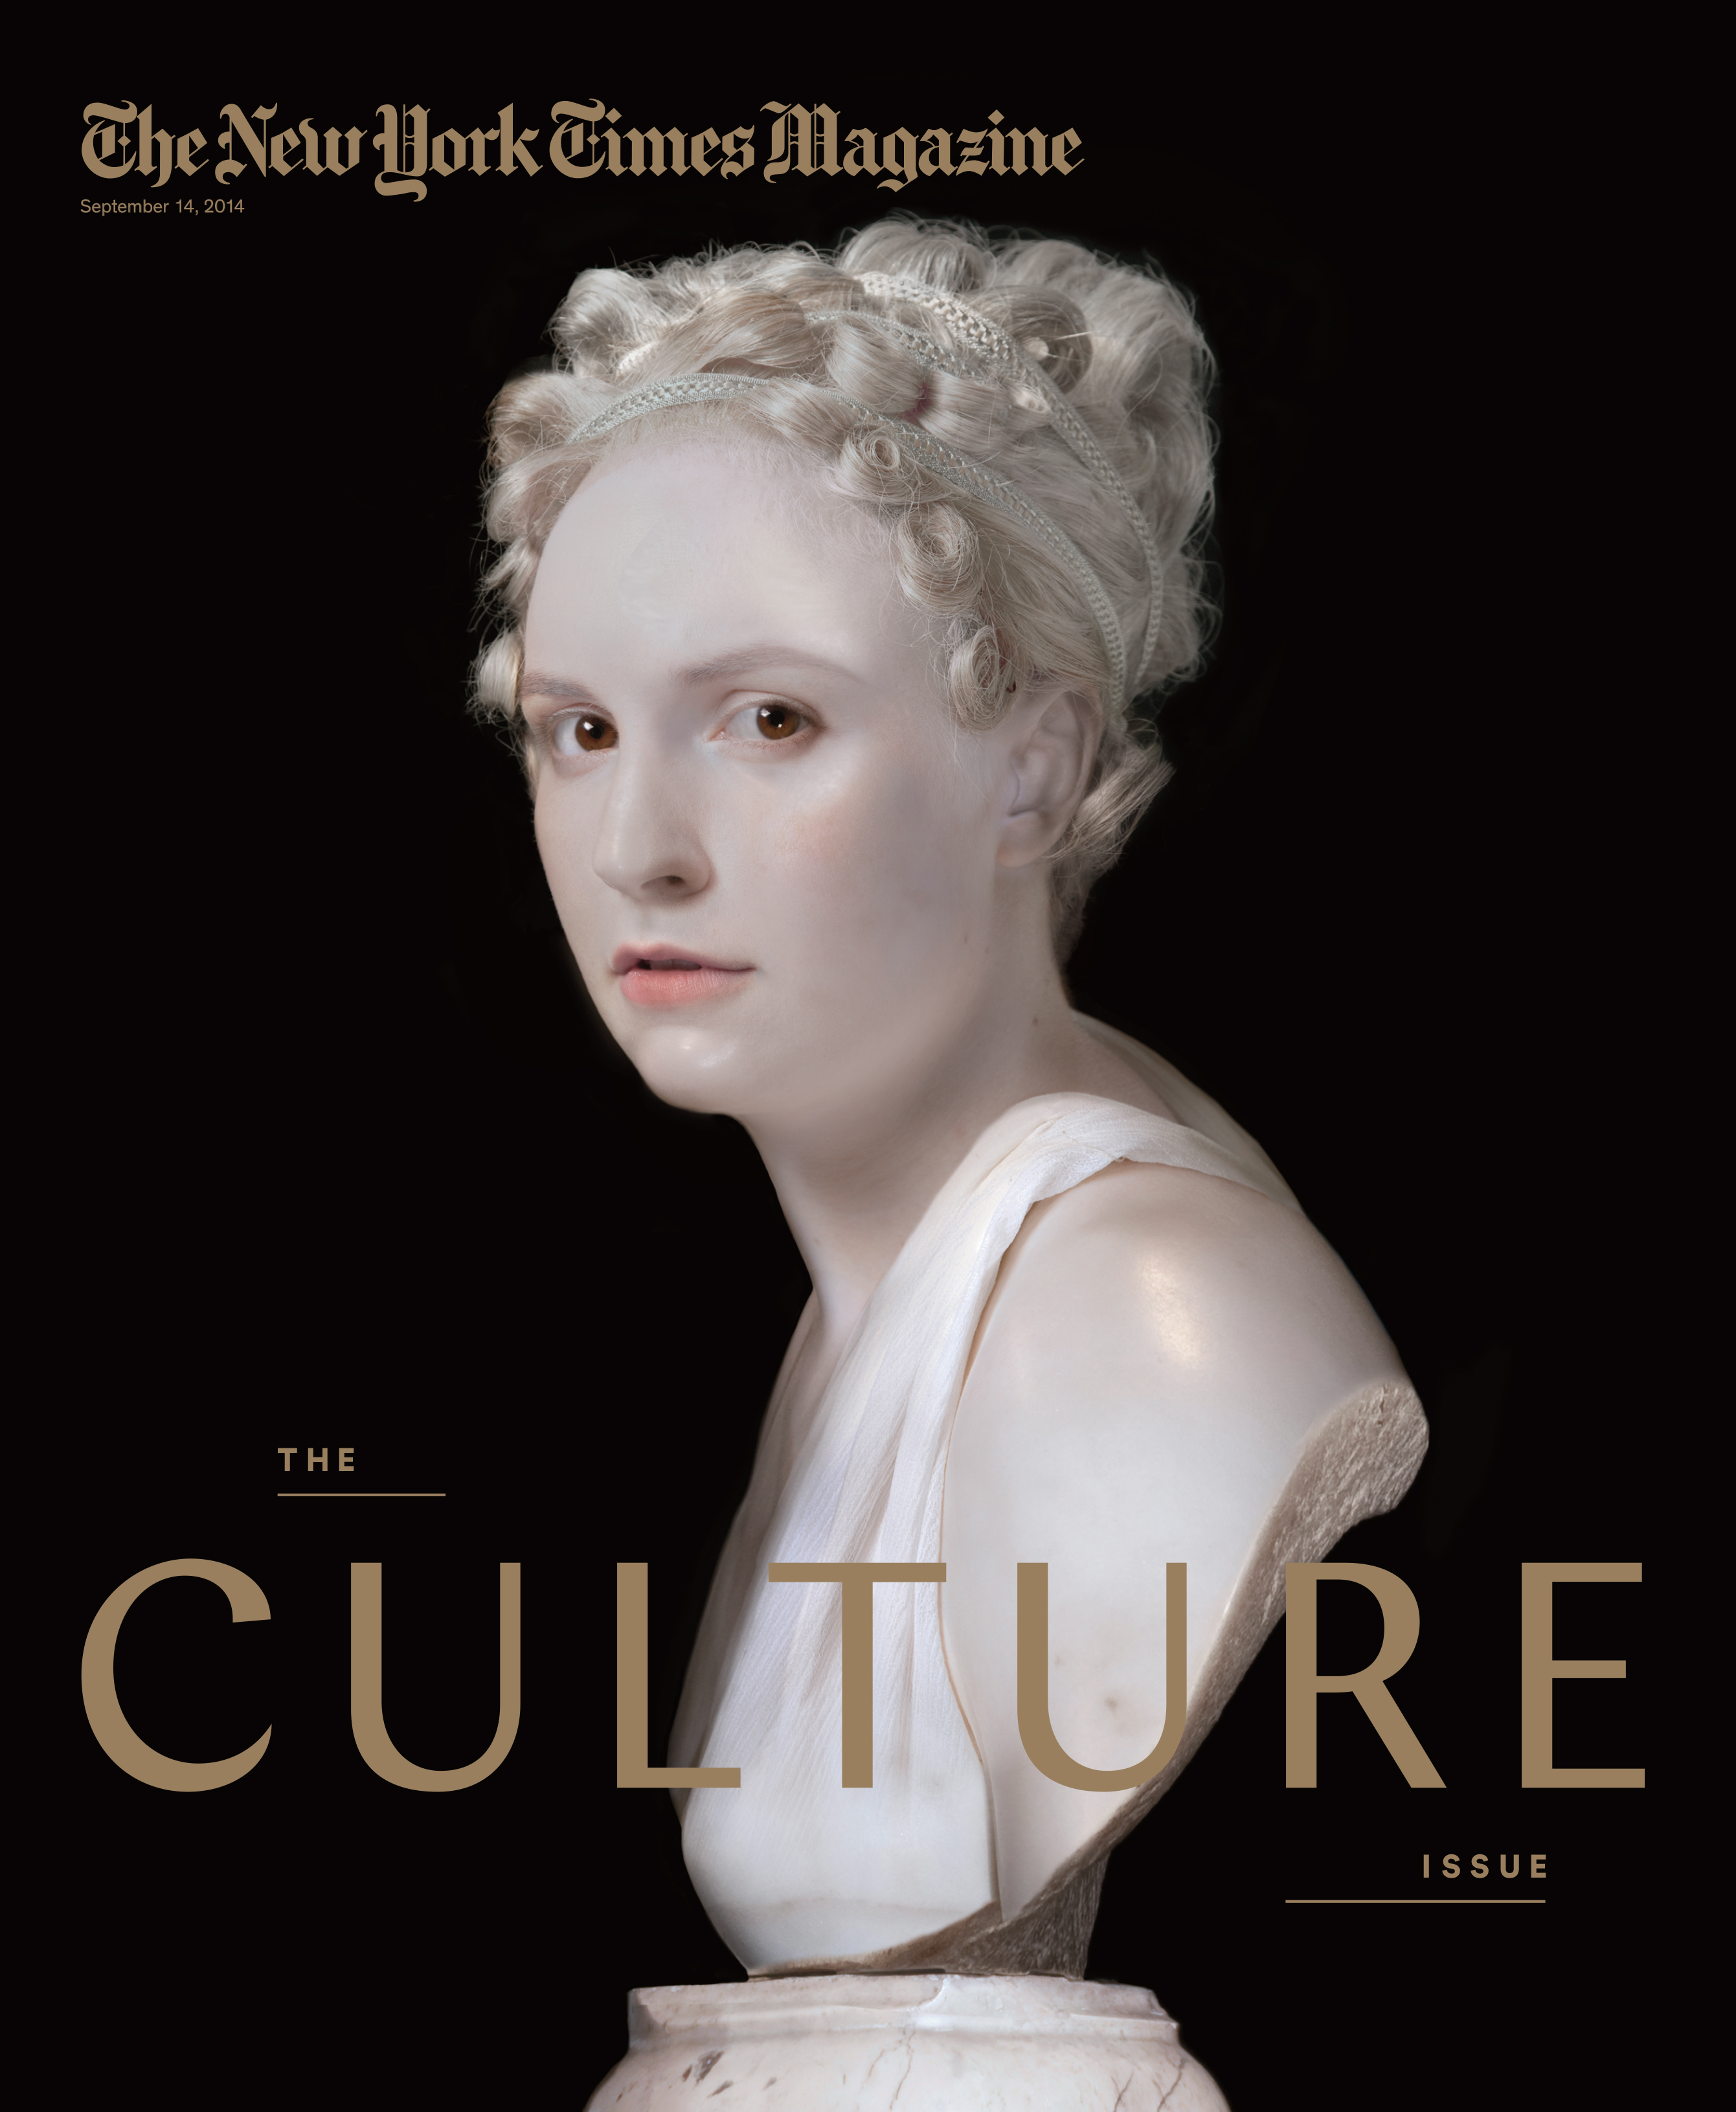 The New York Times Magazine-September 14, 2014, "The Culture Issue"